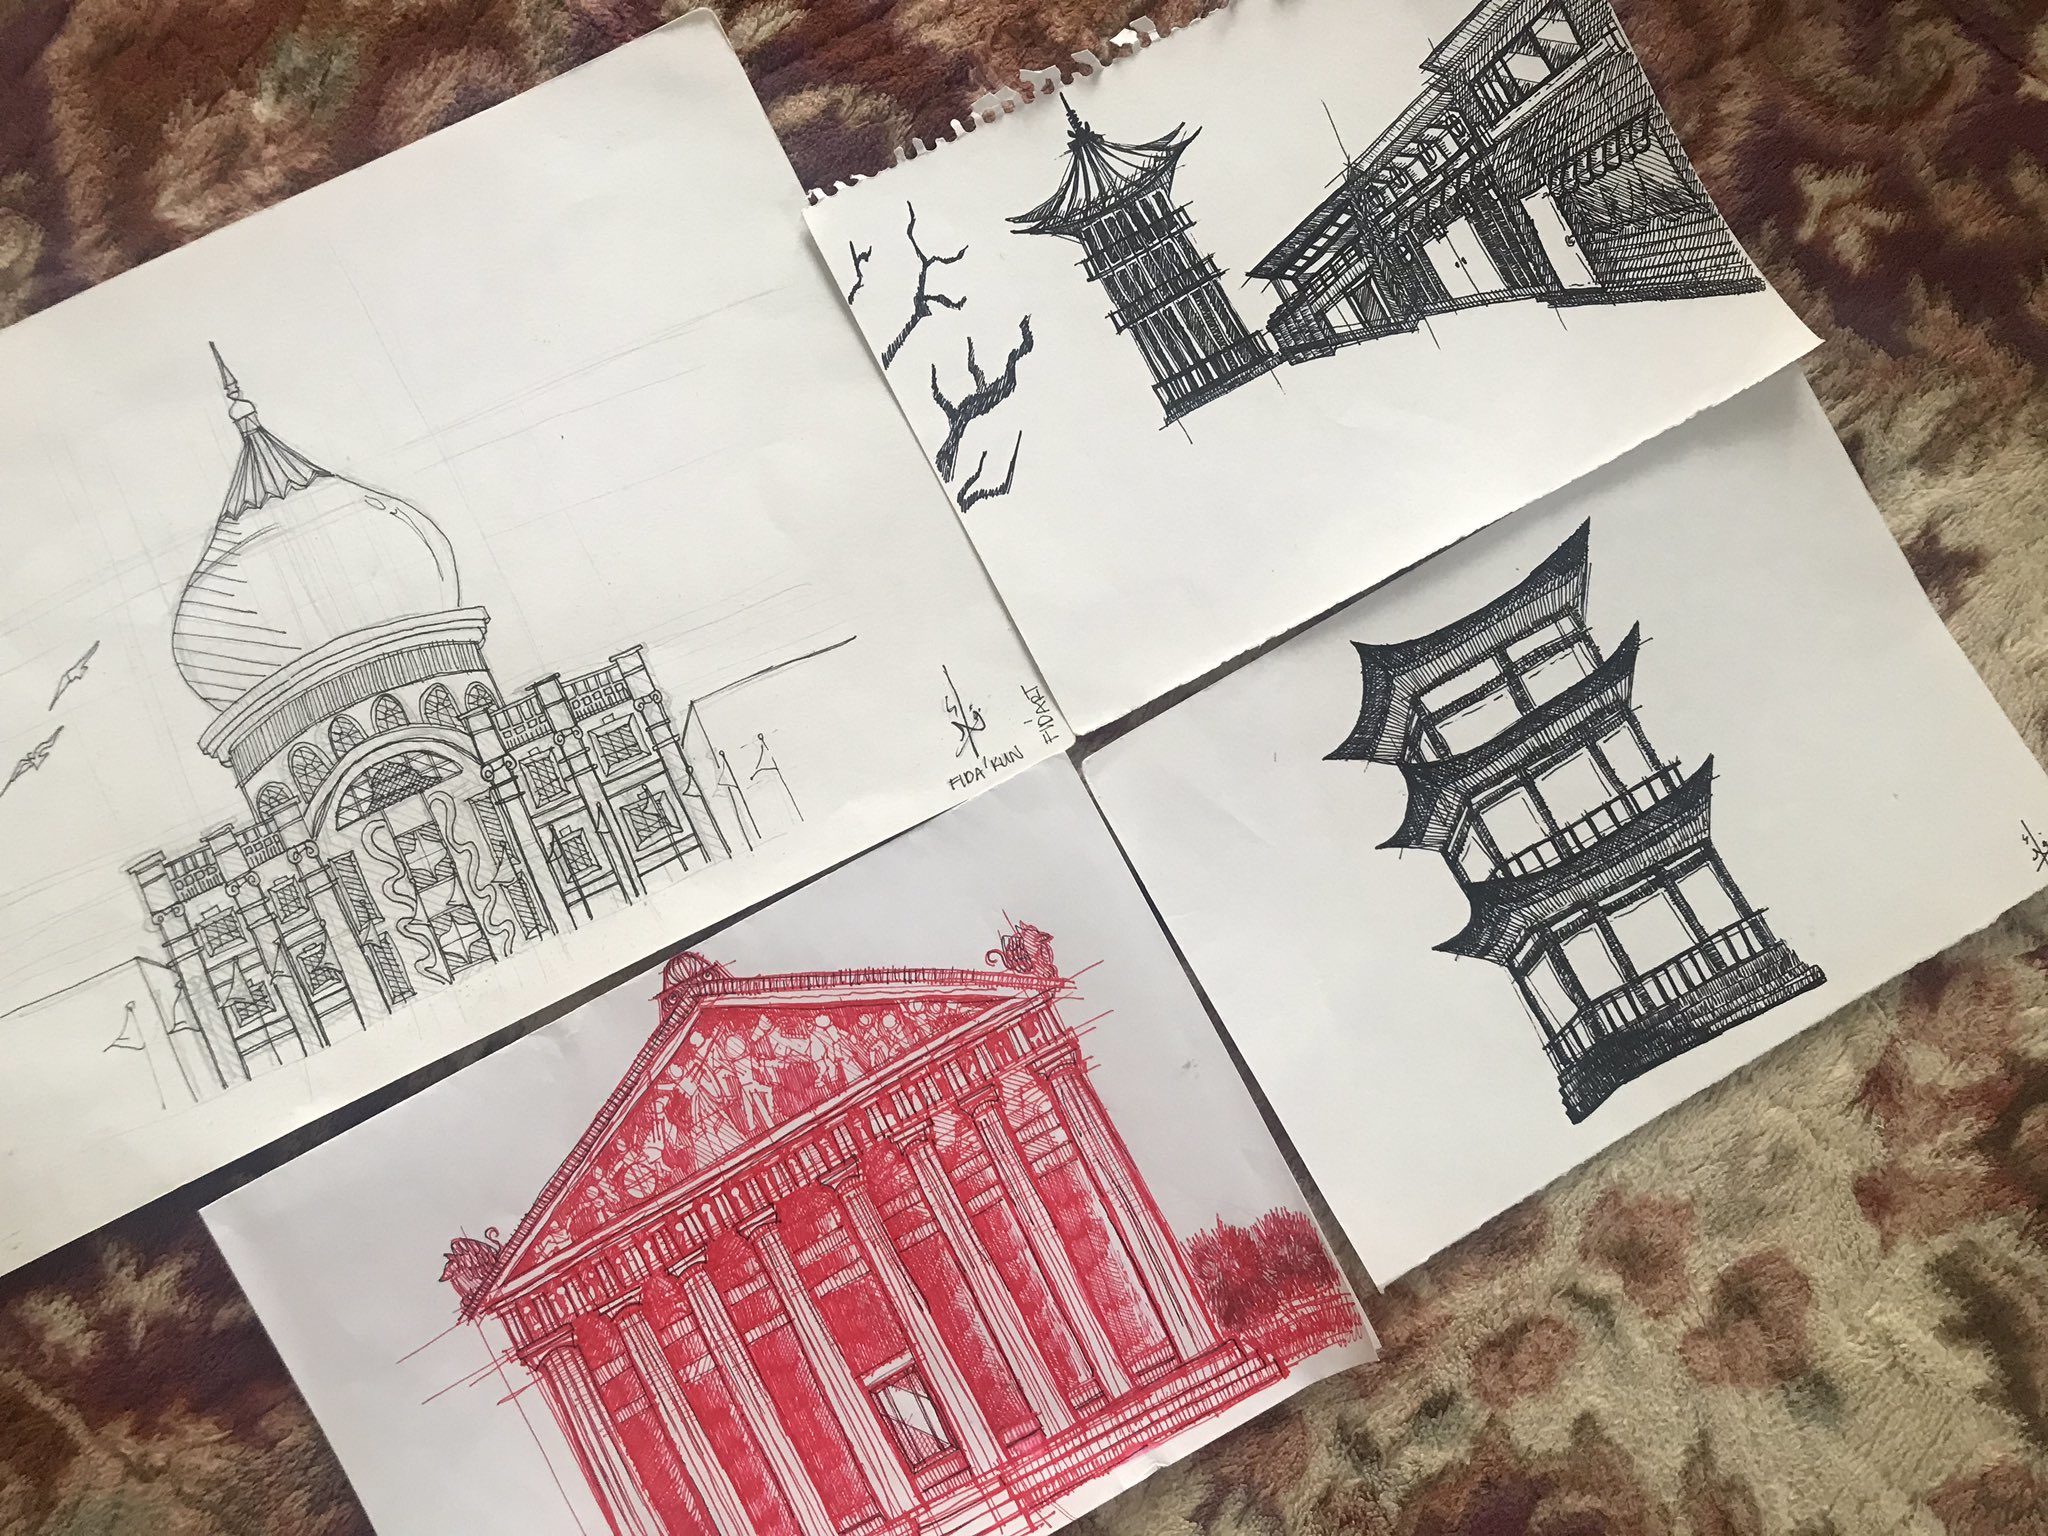 More sketches from young Malaysian boy